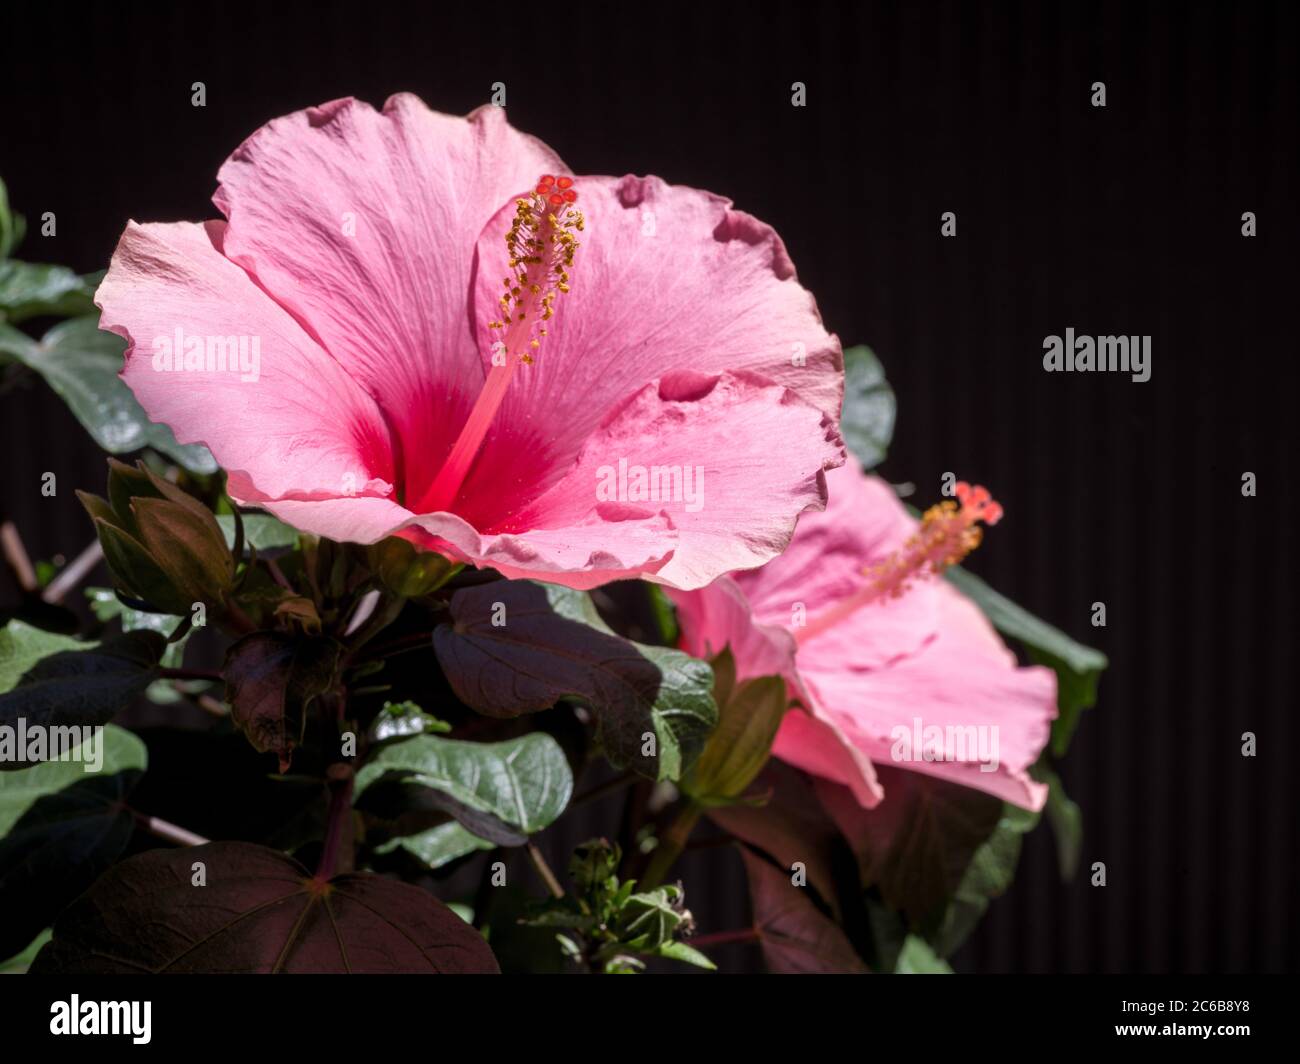 pink hibiscus flower on black background Stock Photo